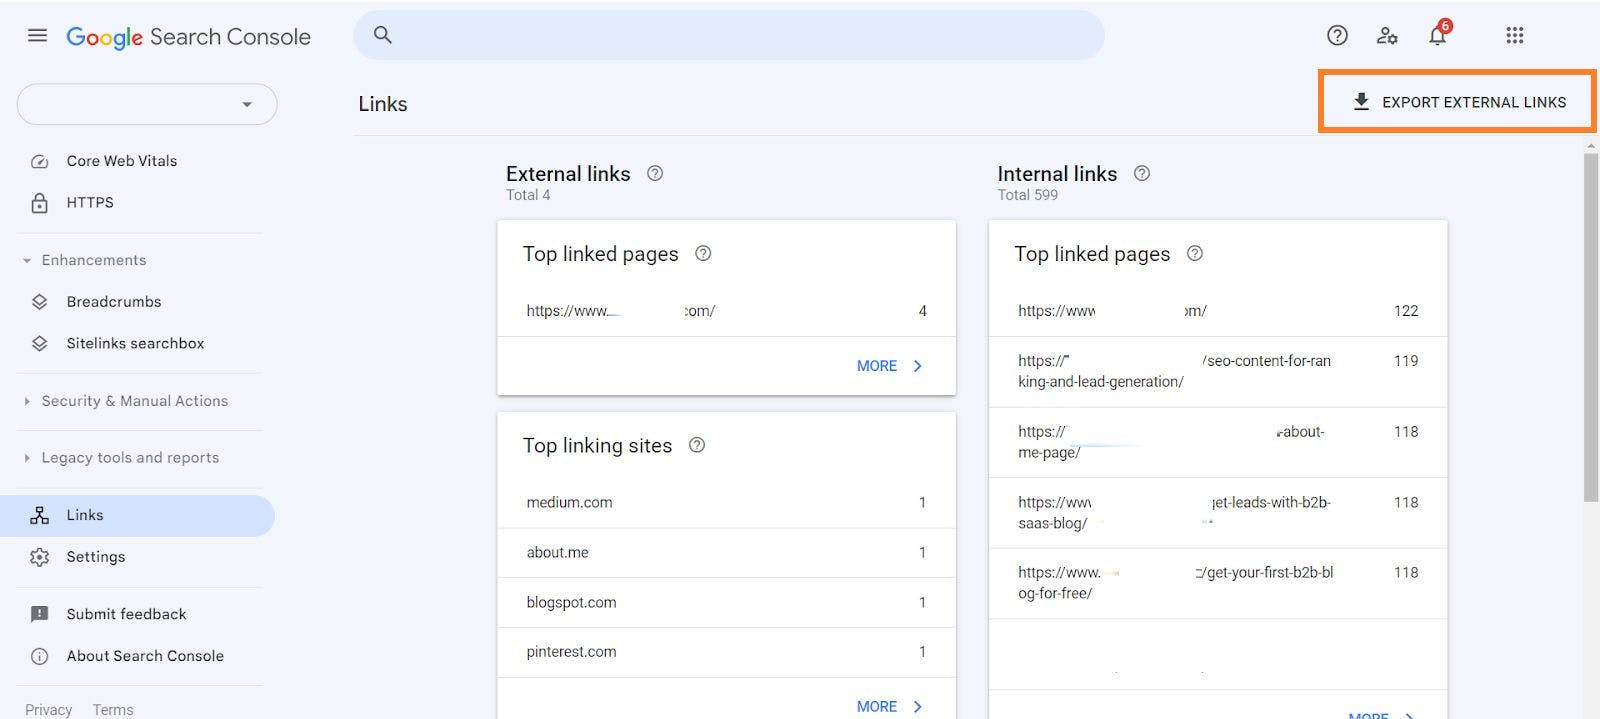 Google Search Console - Export external links